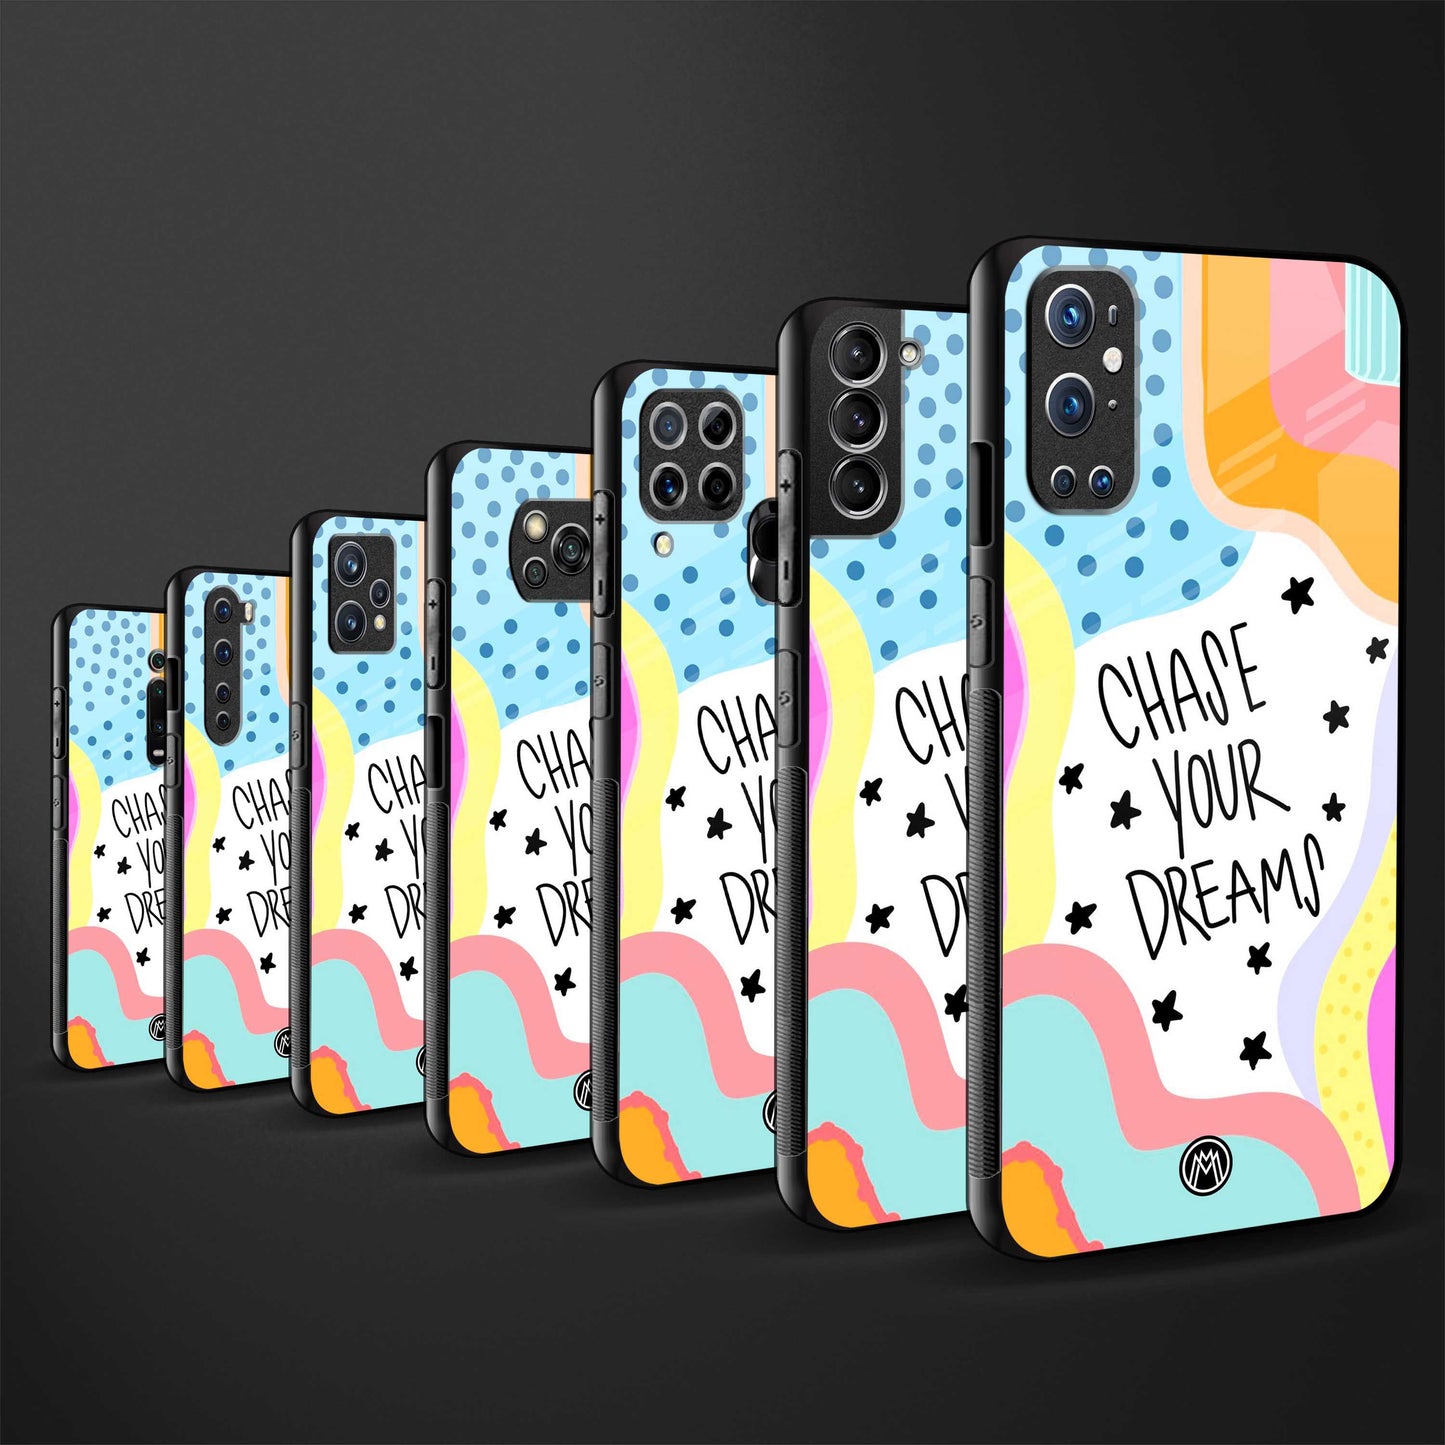 chase your dreams glass case for iphone 6 image-3